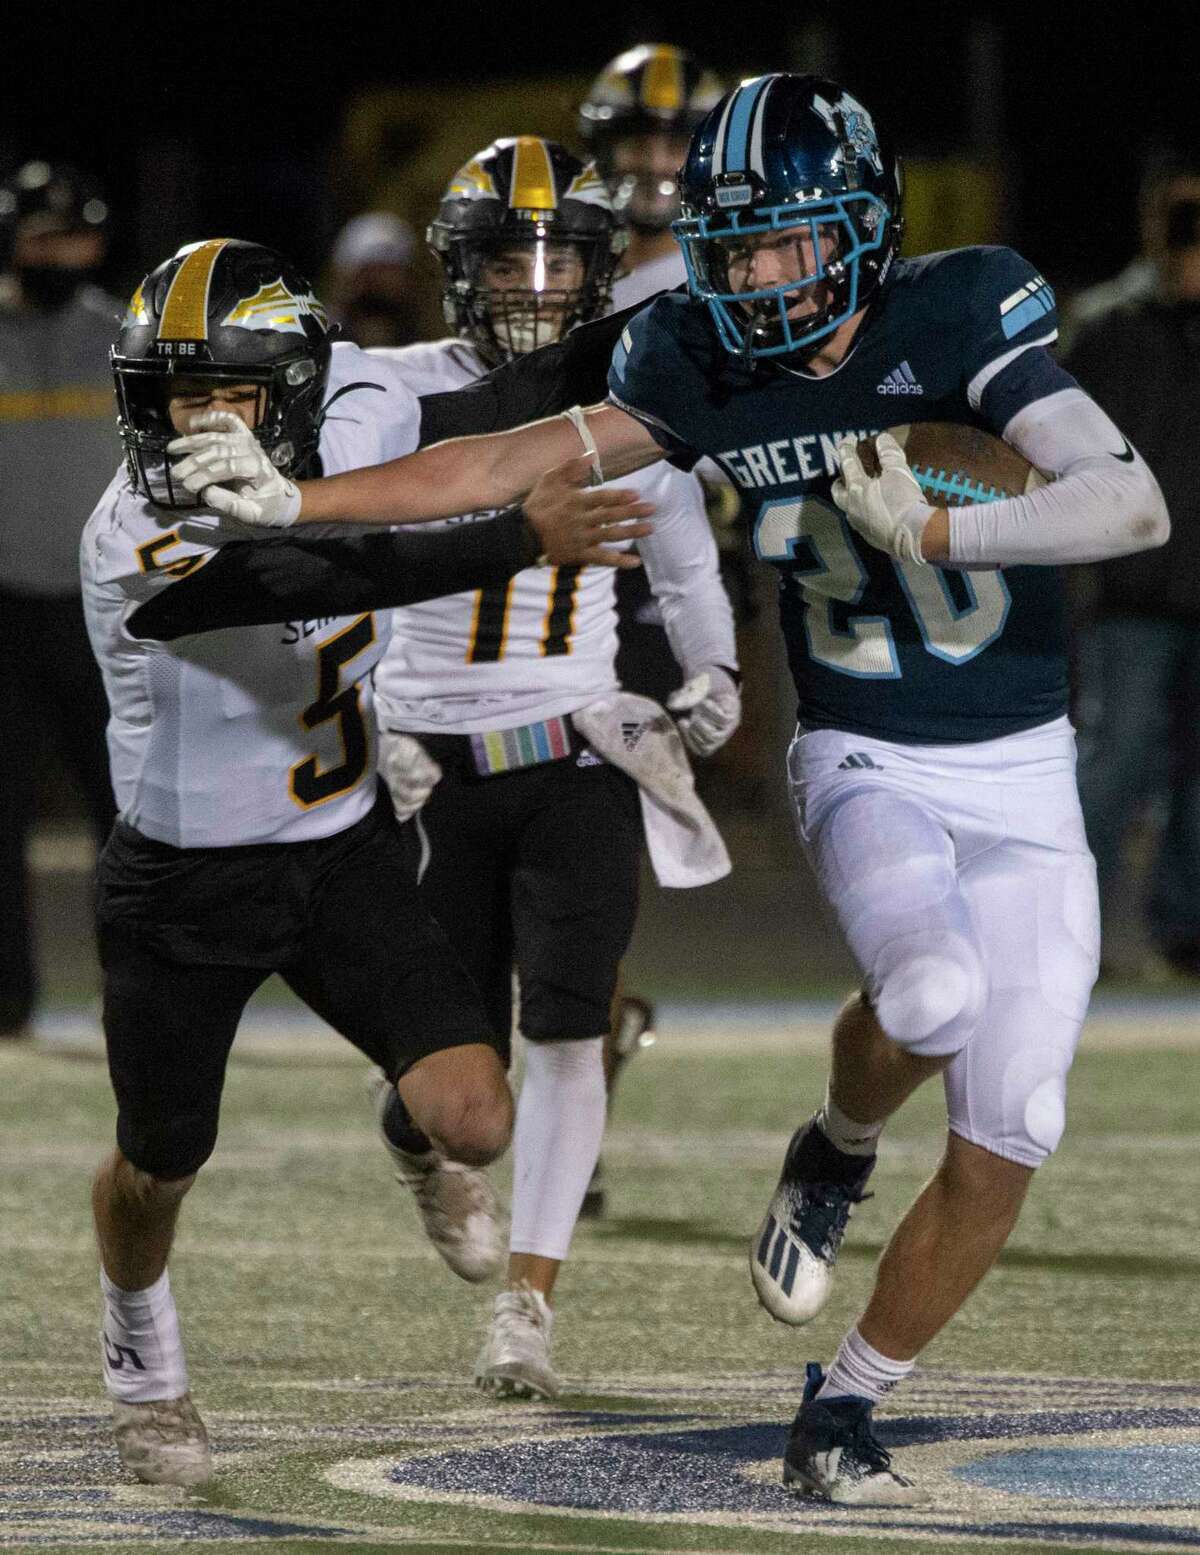 Greenwood's Christian Cook looks for more yards with a stiff-arm to Seminole's River Powers 11/13/2020 at J.M. King Memorial Stadium. Tim Fischer/Reporter-Telegram